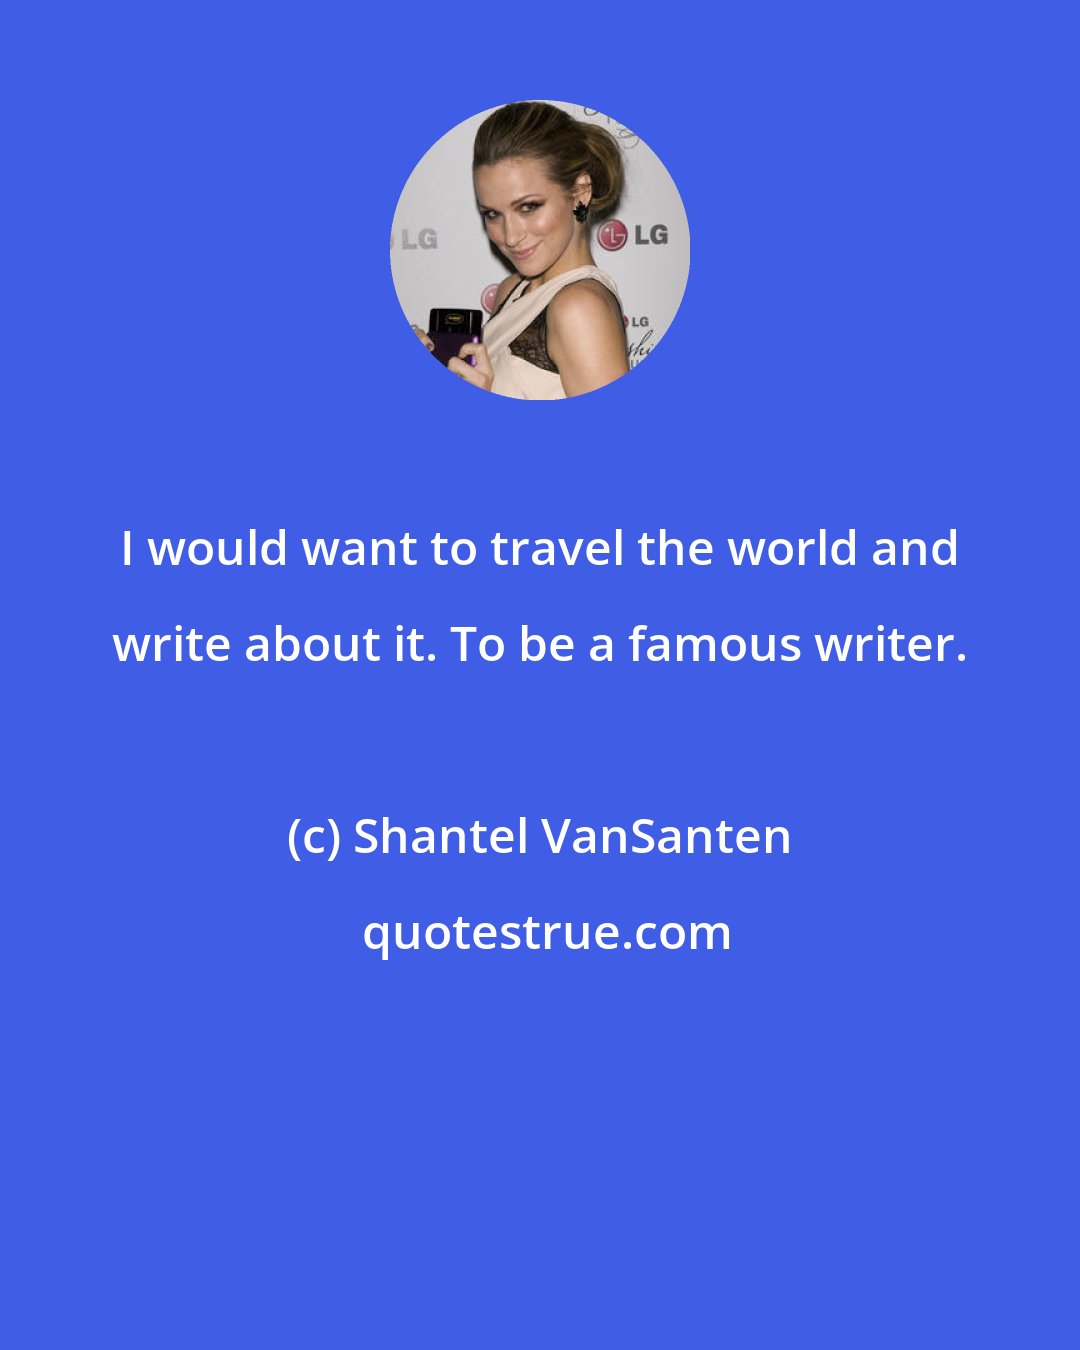 Shantel VanSanten: I would want to travel the world and write about it. To be a famous writer.